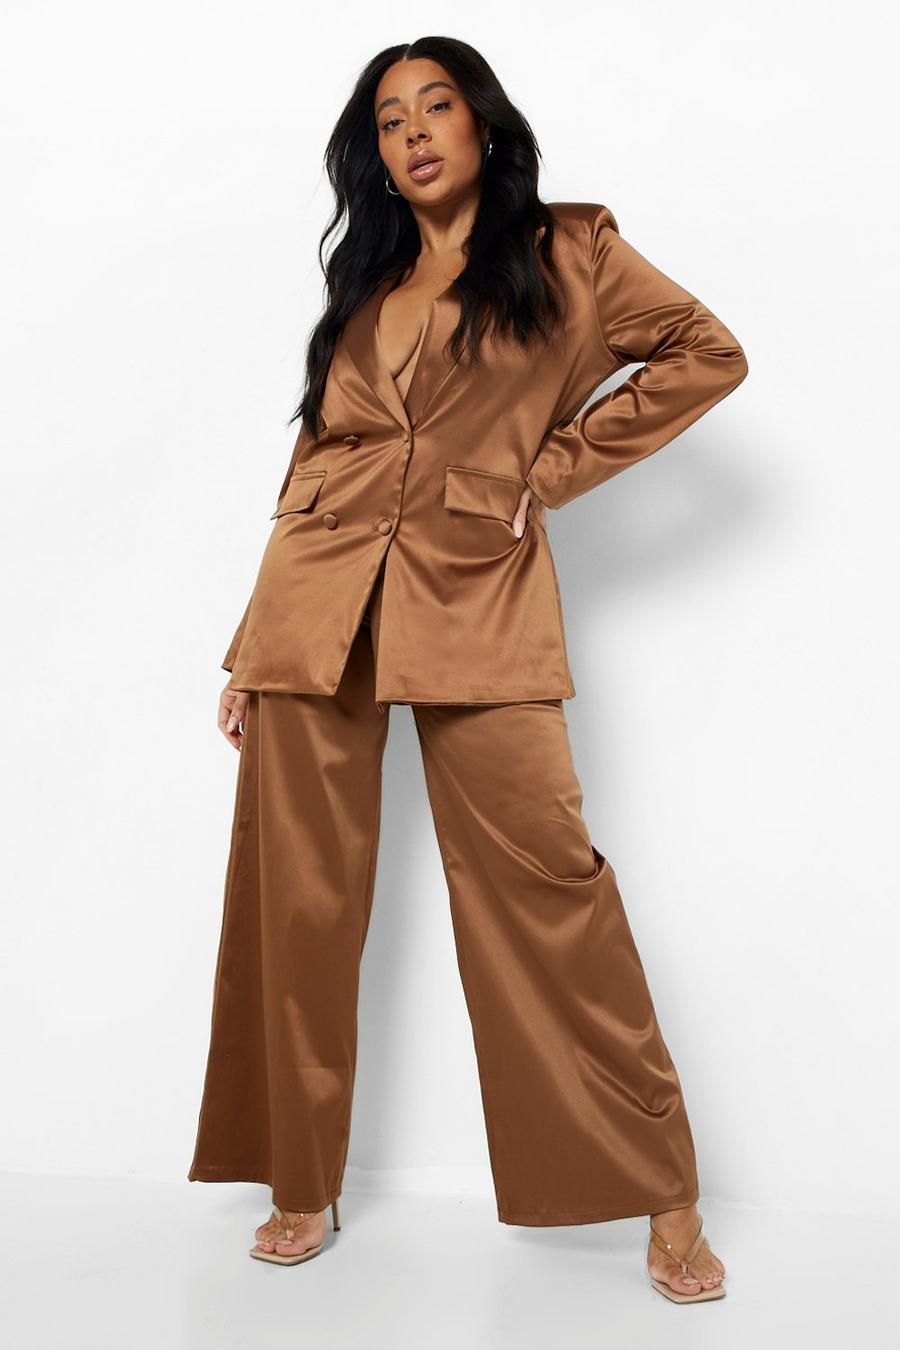 The Frolic Plus Wide Leg Suit Pants In Coconut Shell Brown, 40% OFF